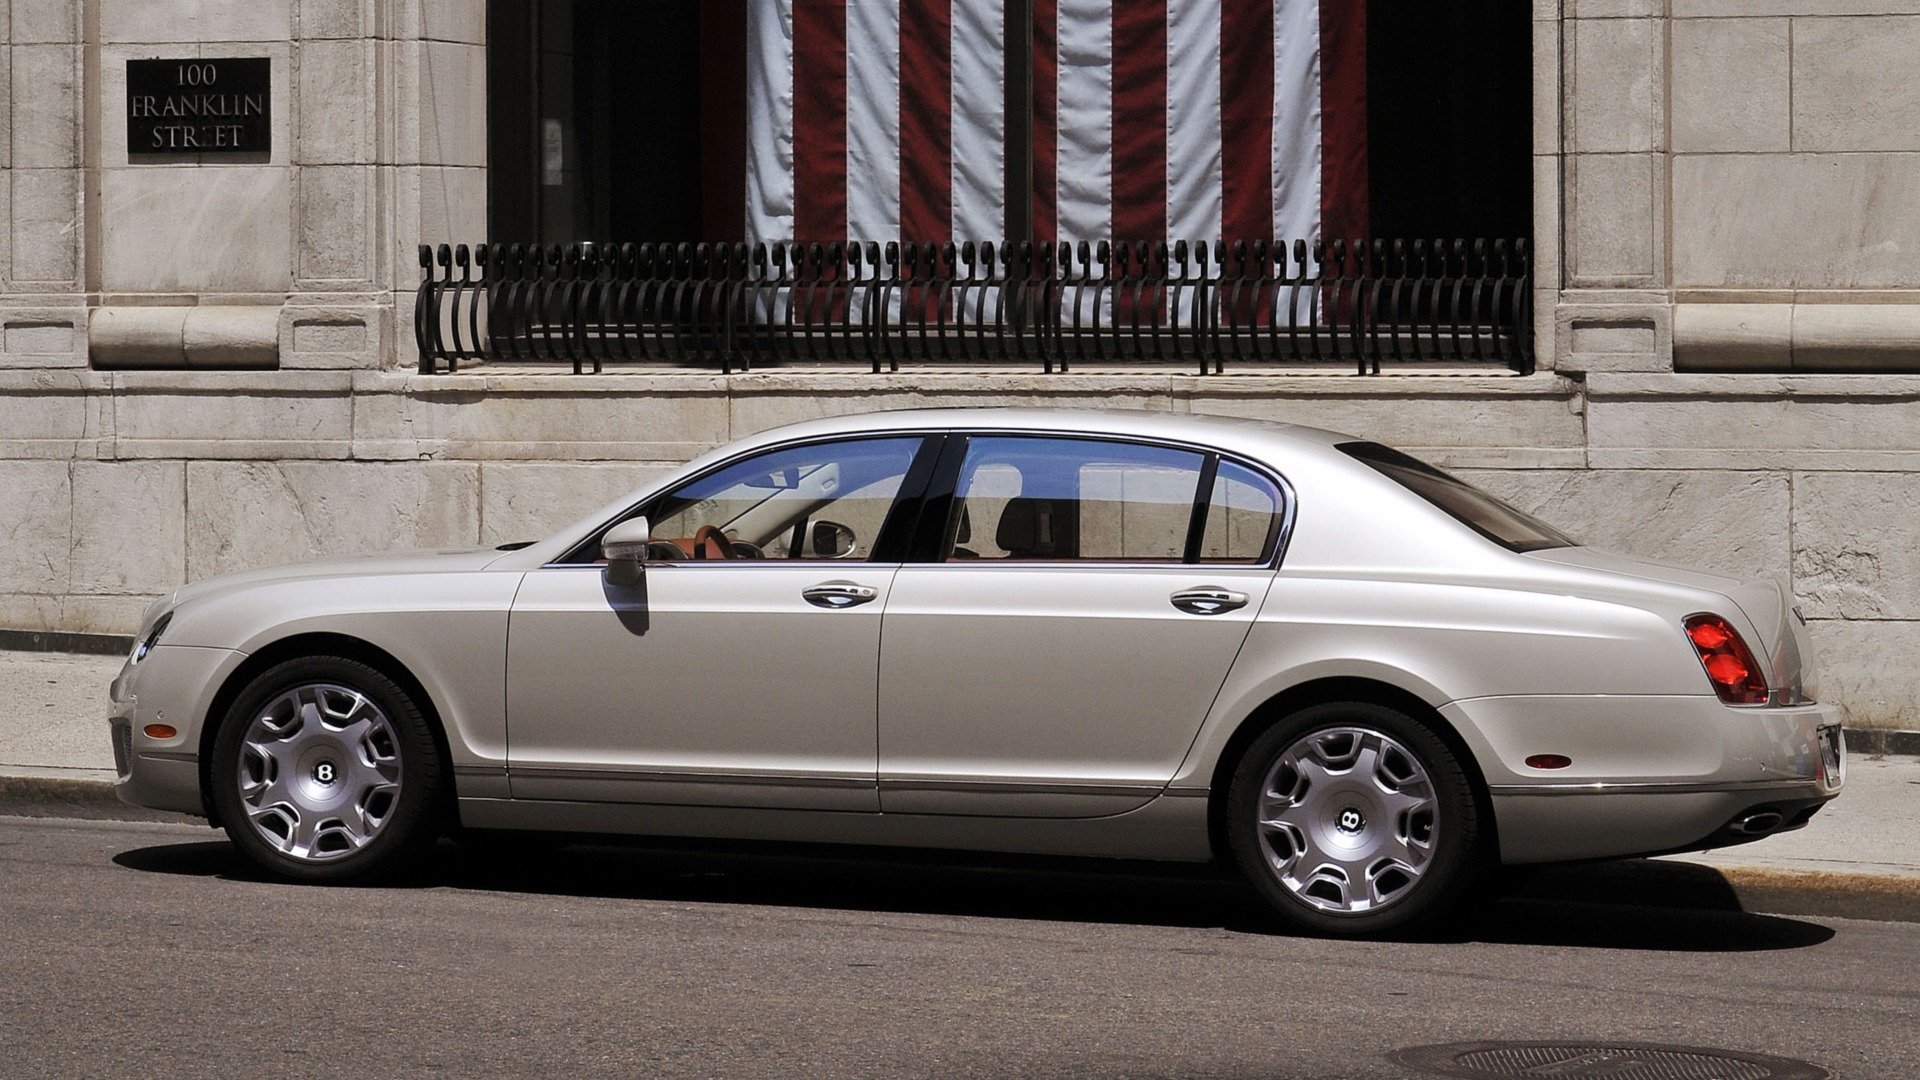 Bentley Continental Flying Spur - 2008 宾利12 - 1920x1080